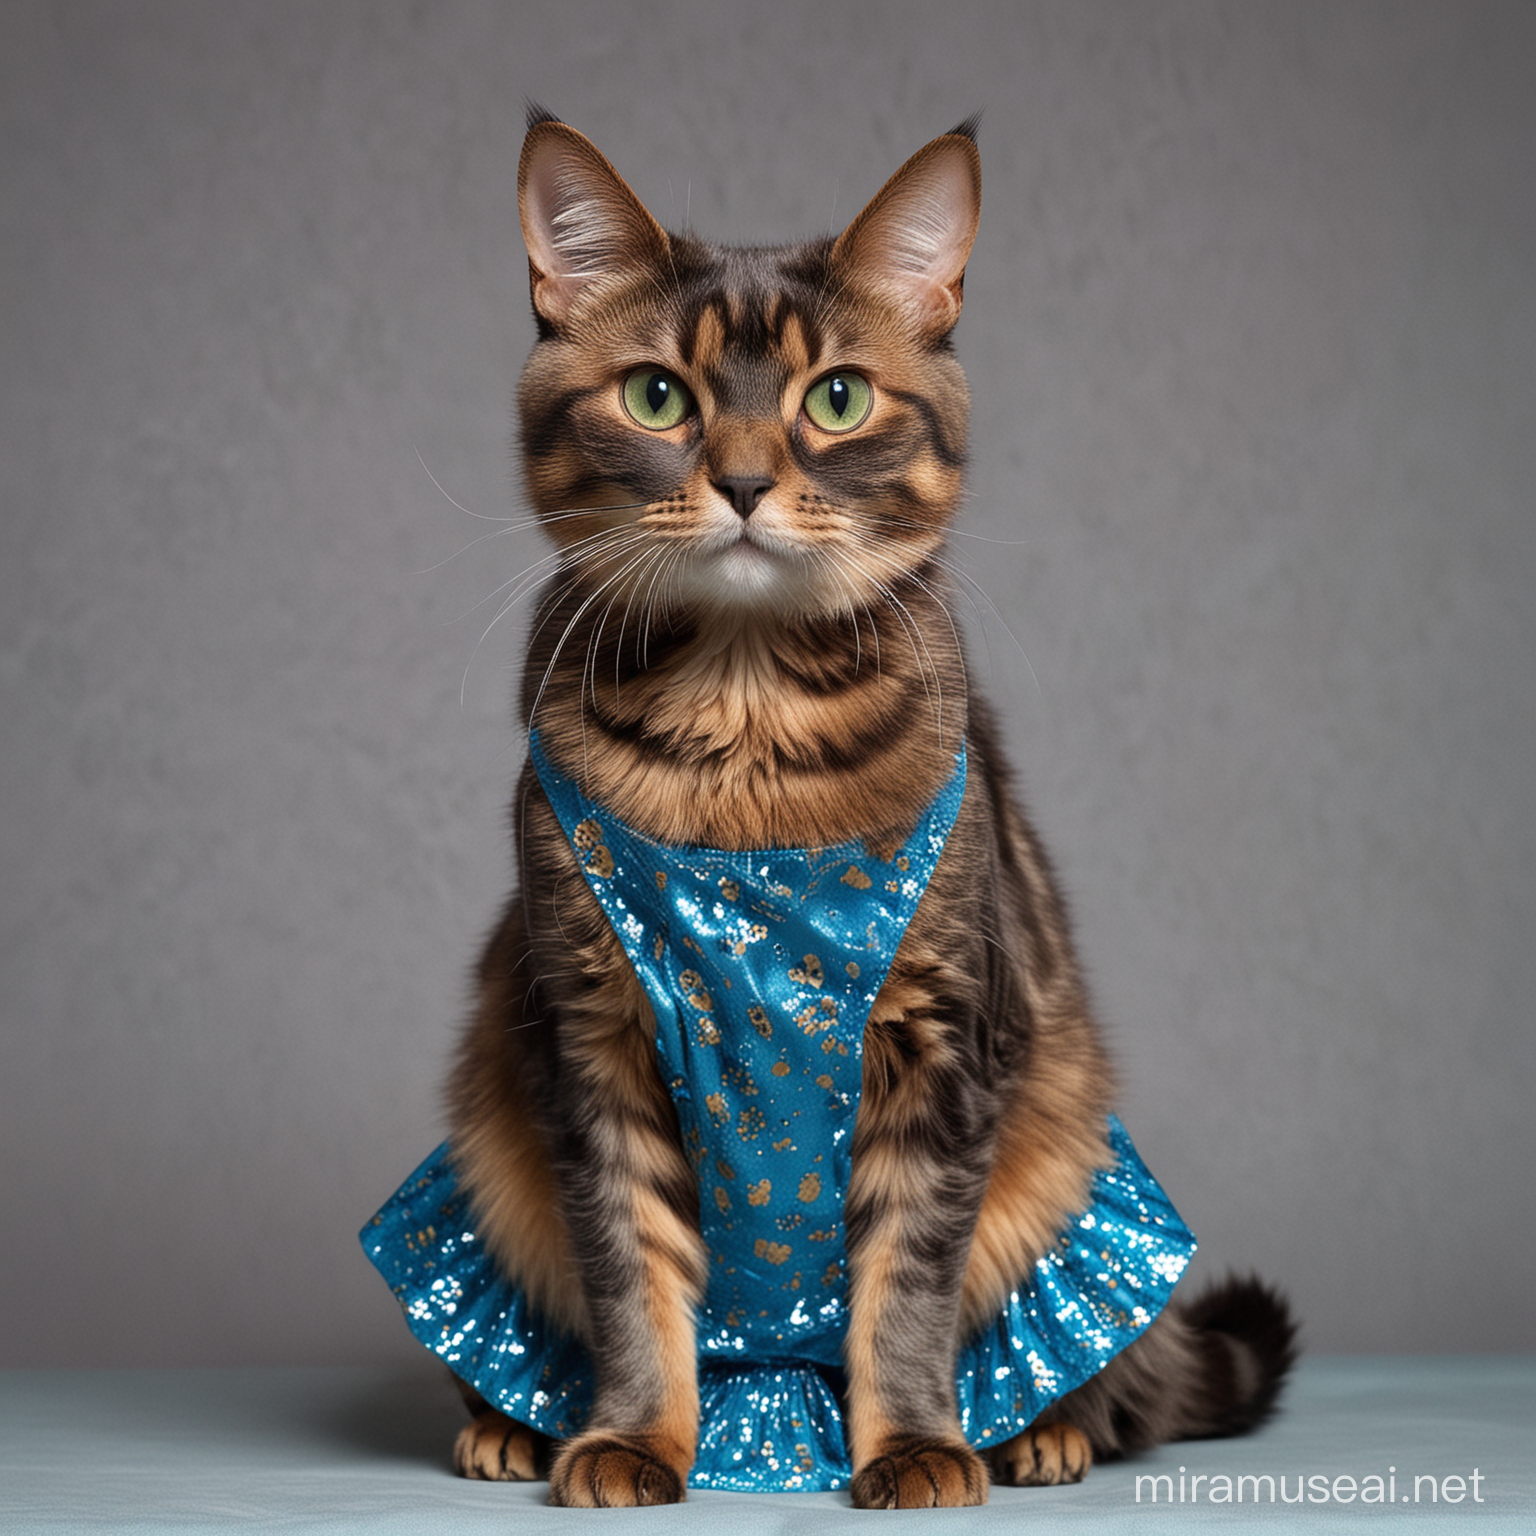 Tortoiseshell cat standing like a human. it has green eyes with big pupils. it is wearing a blue shiny dress